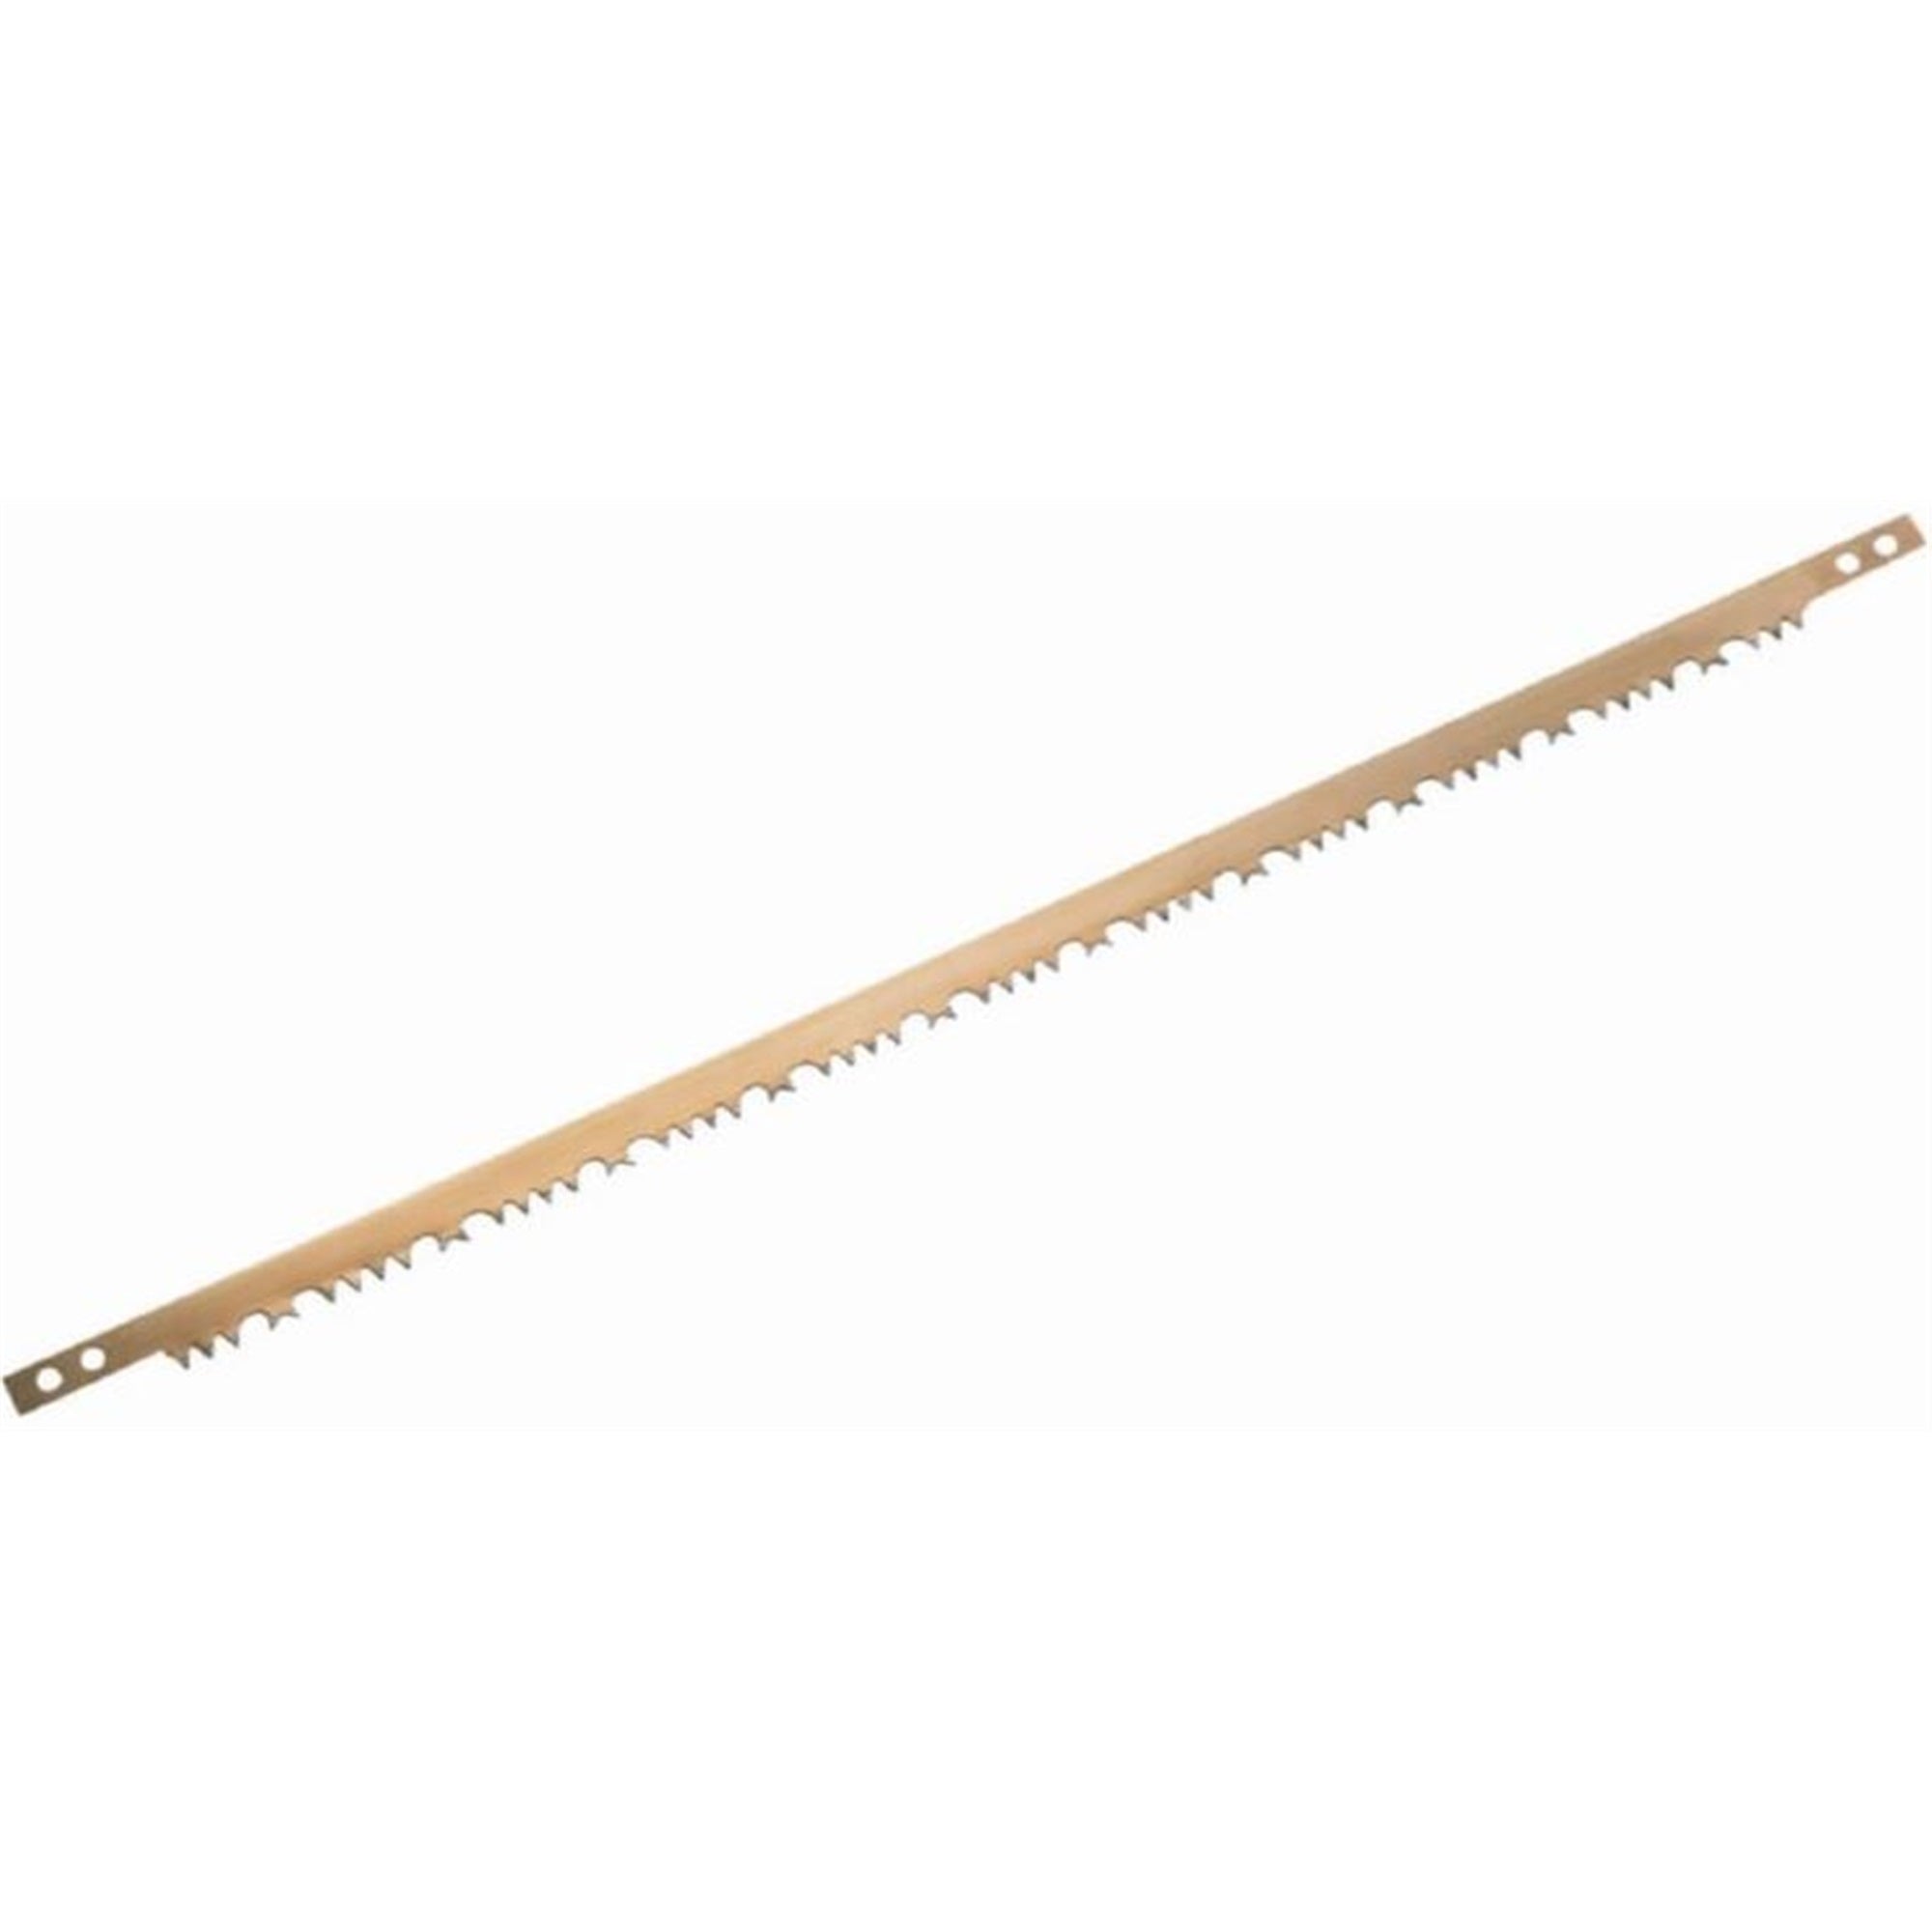 Bahco Replacement Tempered Steel Blade with Hard-point Raker Toothing Bow Saw Blade, 30"